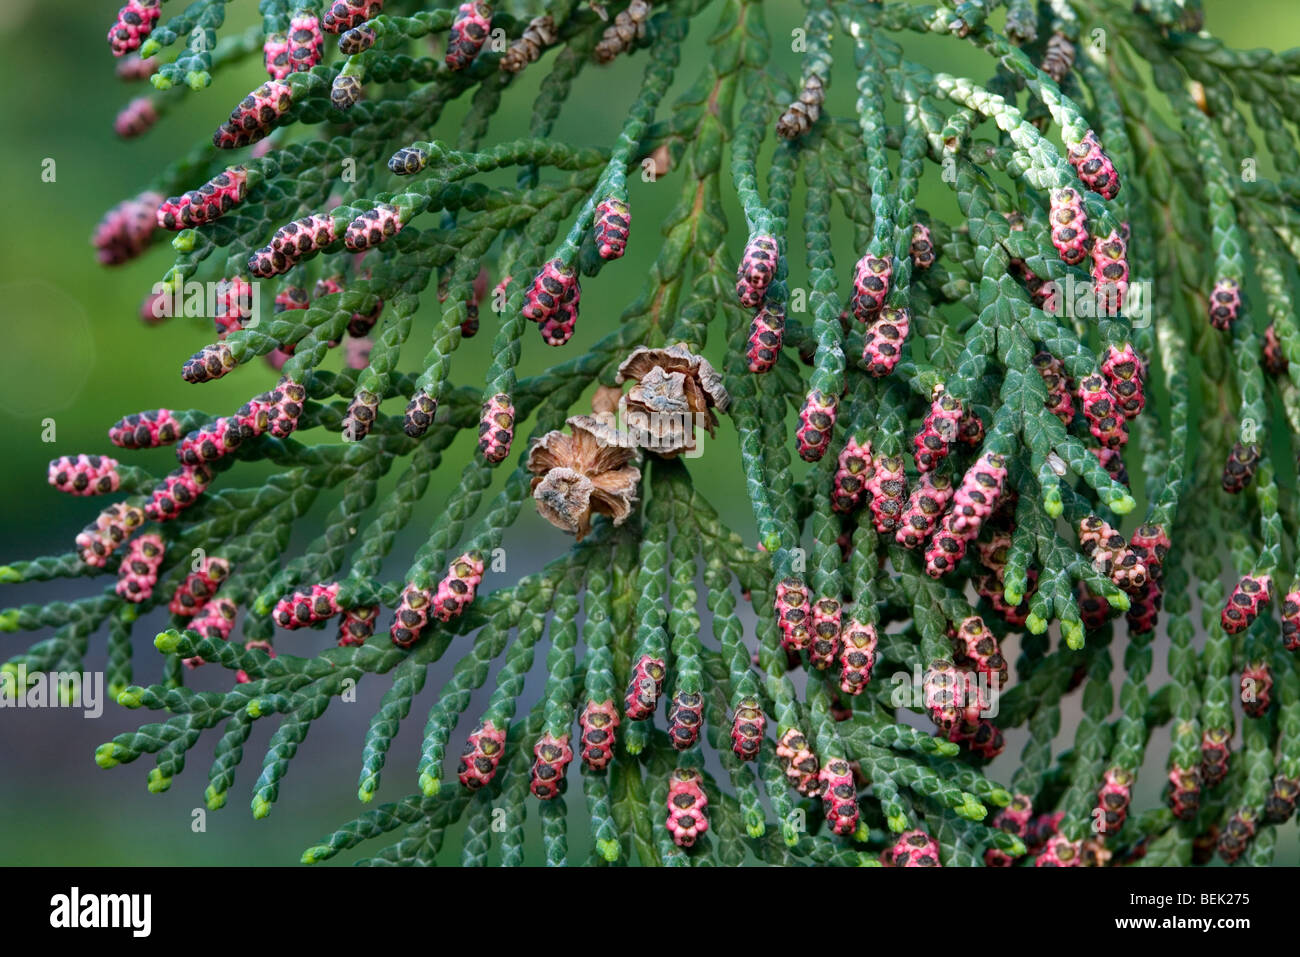 Port Orford cedar / Lawson cypress (Chamaecyparis lawsoniana), native to Oregon and northwestern California, close up of branches with cones Stock Photo